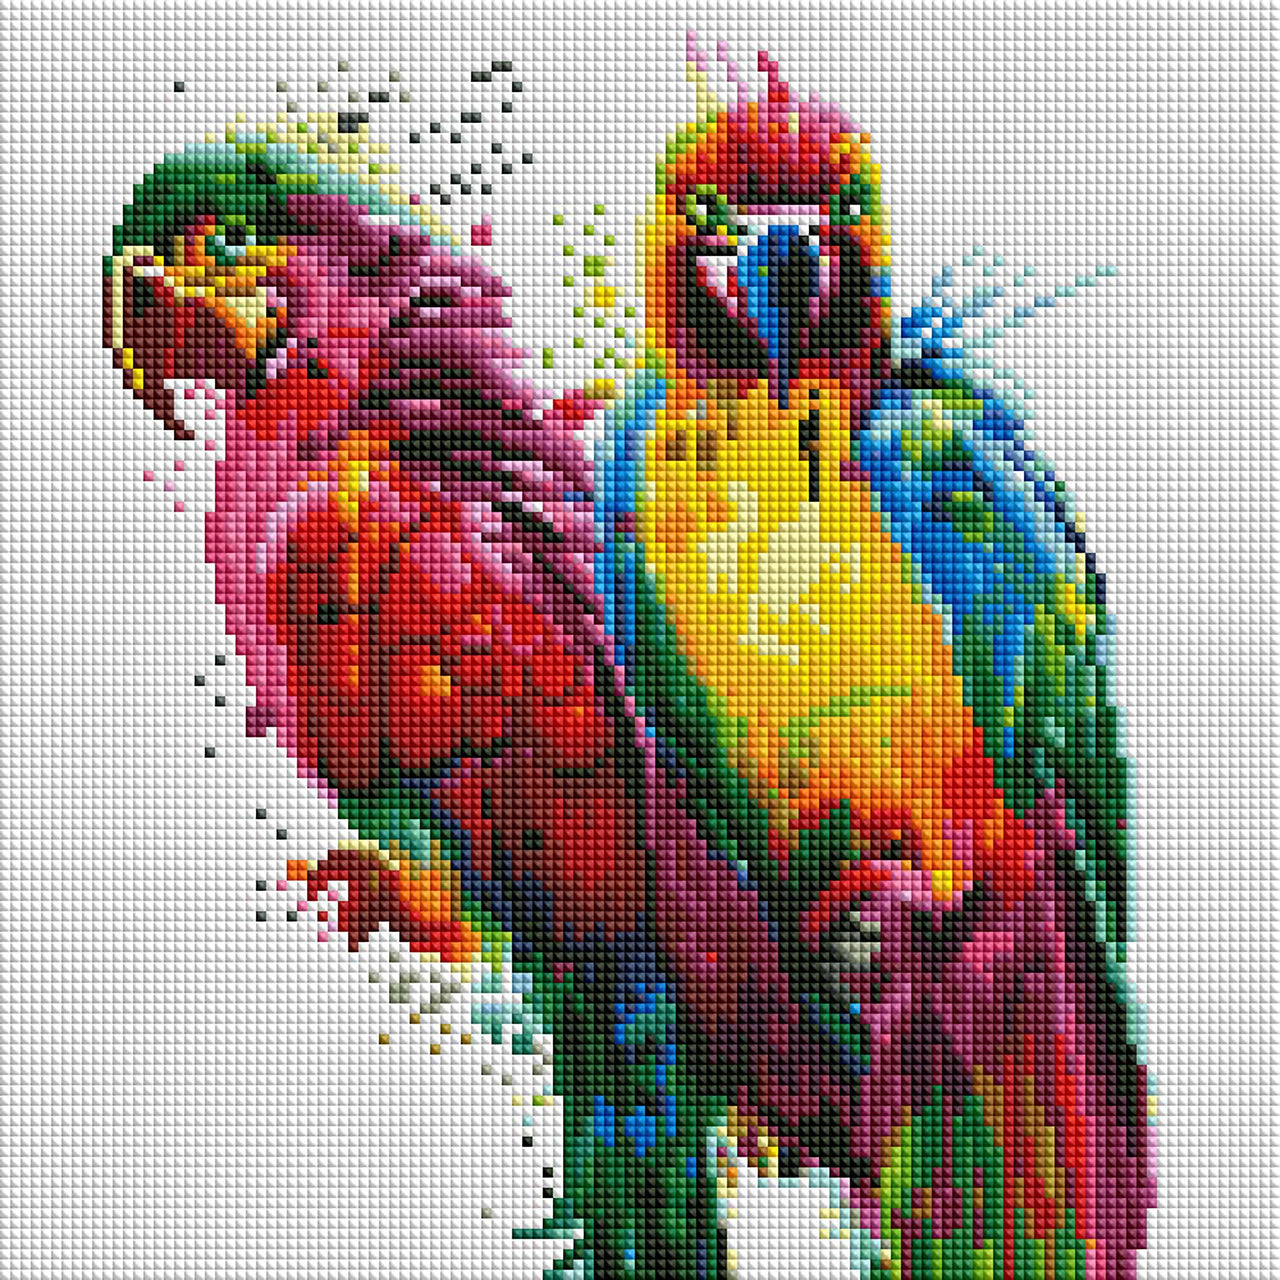 Diamond Painting Tropical Birds 12.6″ x 12.6″ (32cm x 32cm) / Square With 36 Colors including 3 ABs / 15,627